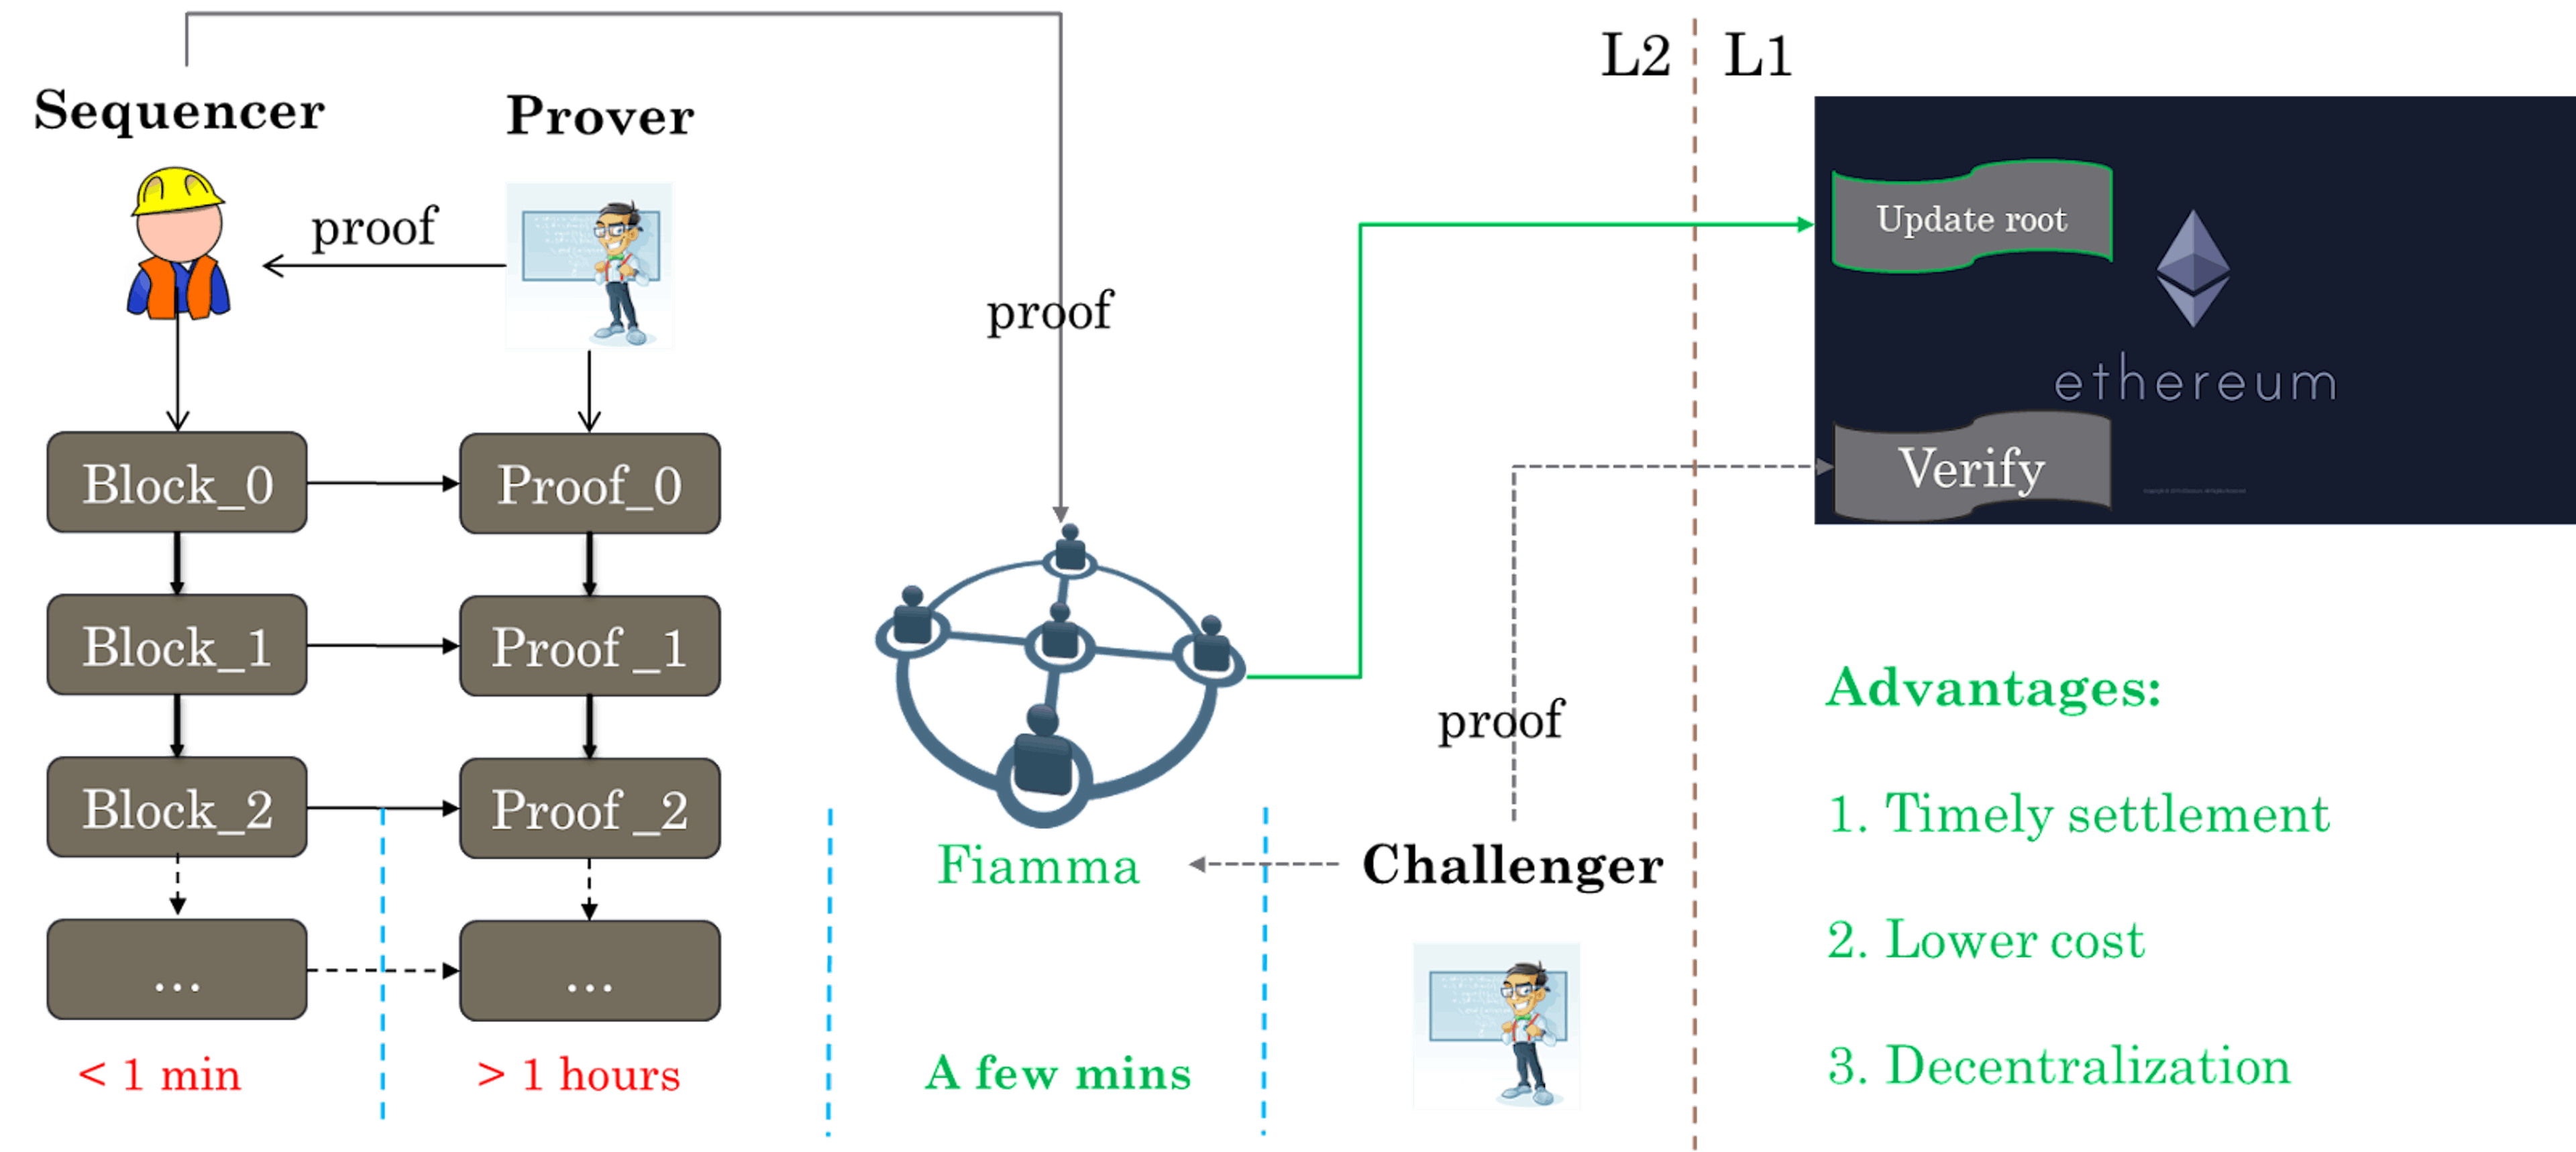 Fig4. The new progress of verifying proof in L2